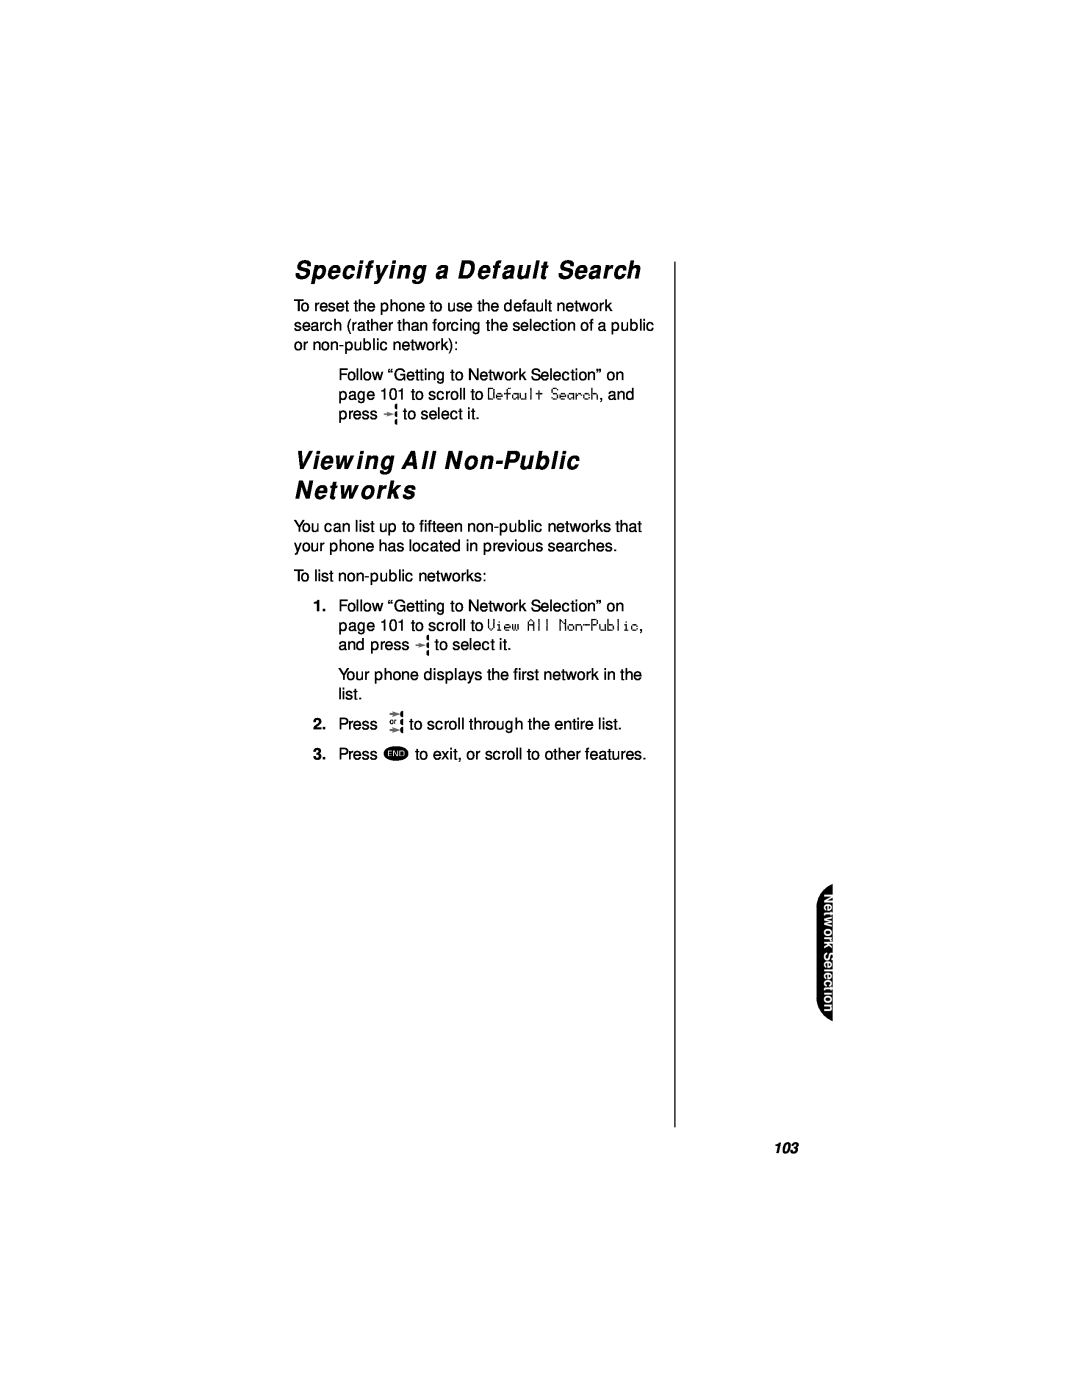 Motorola StarTAC specifications Specifying a Default Search, Viewing All Non-Public Networks 